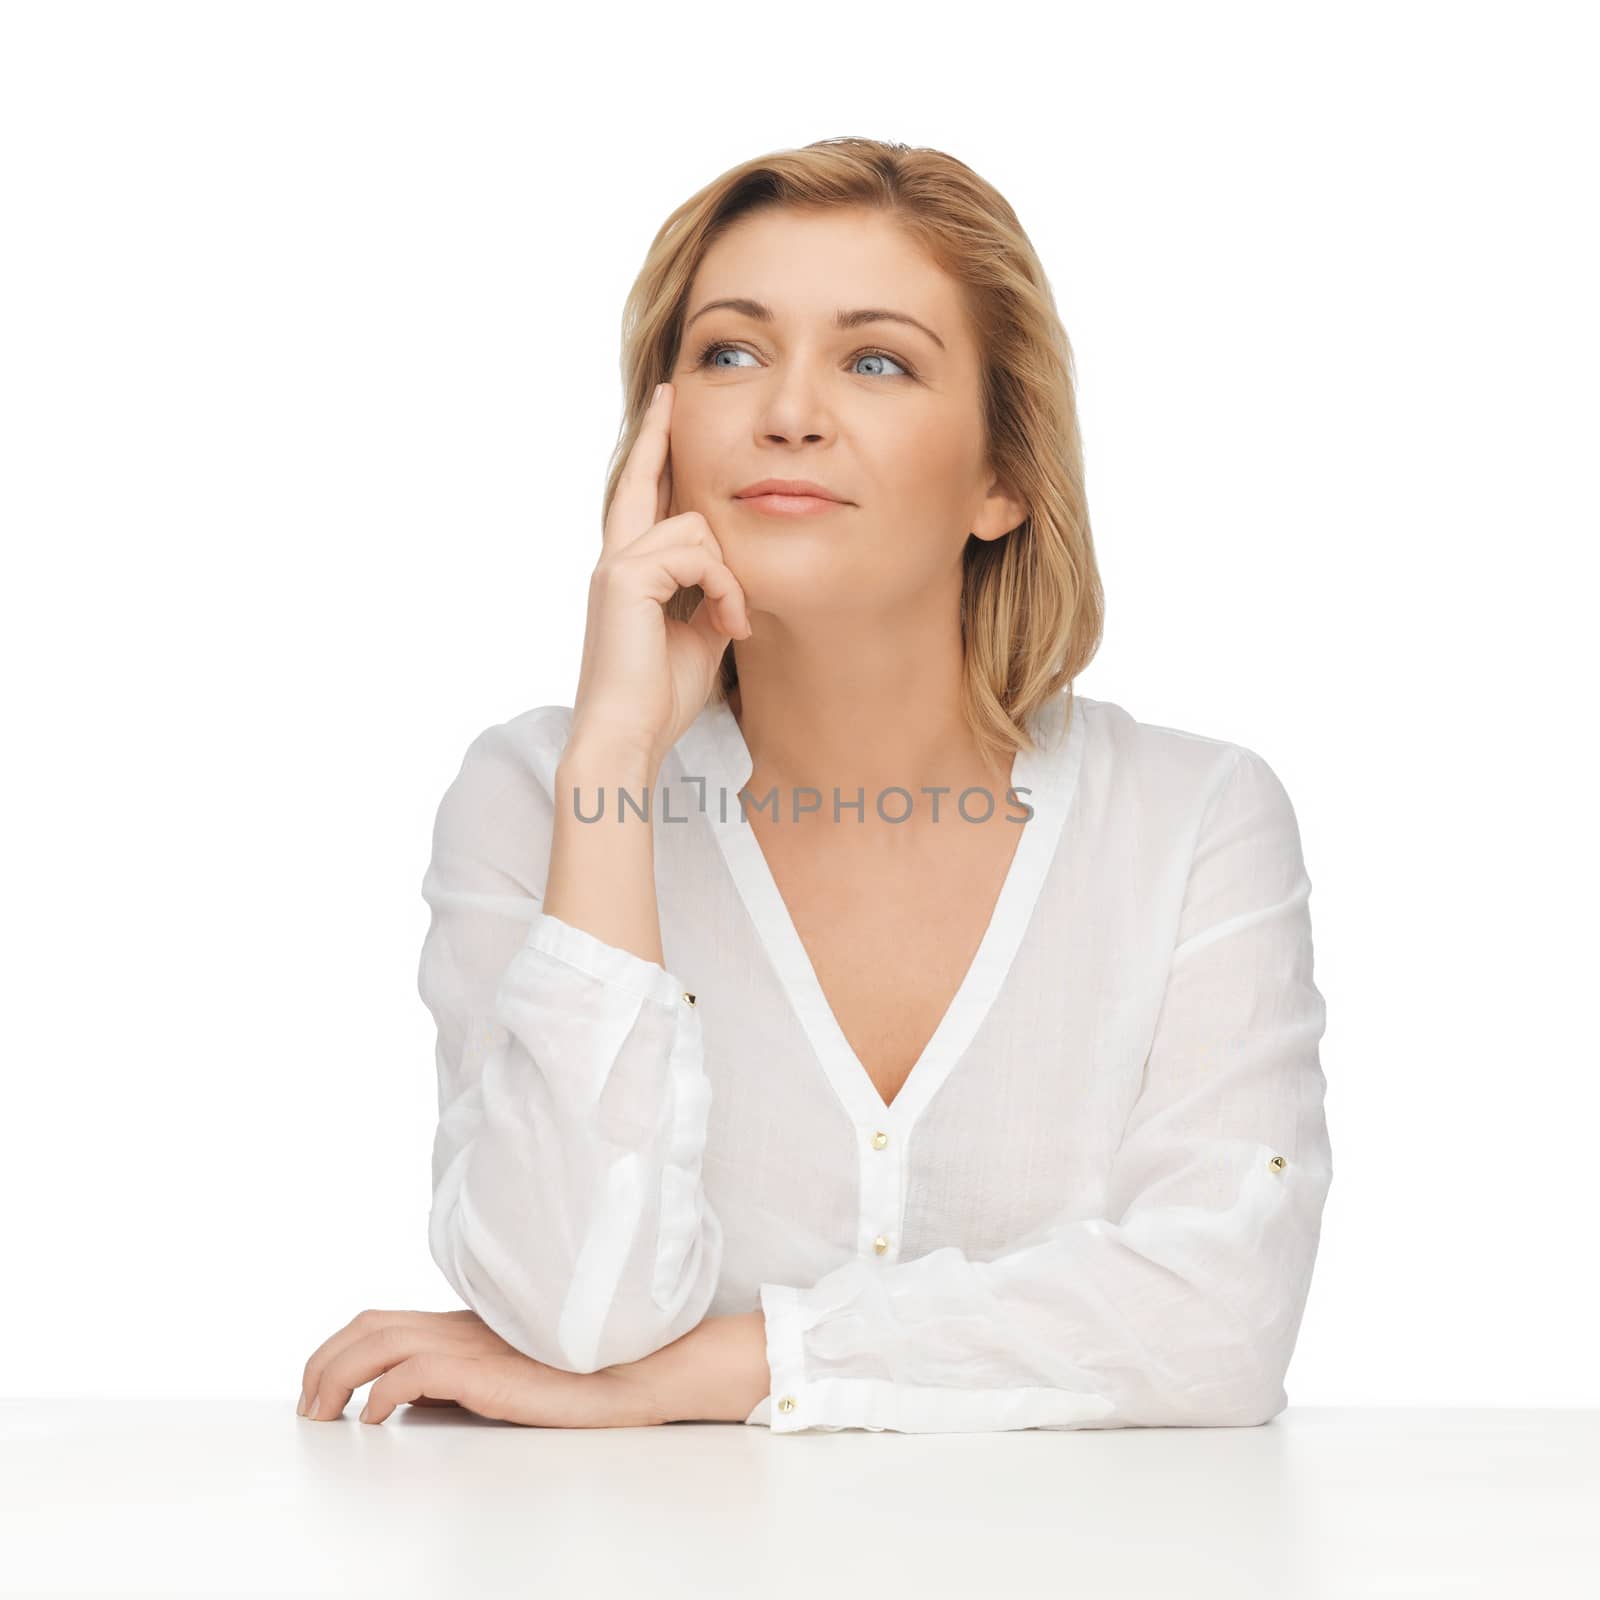 bright picture of thoughtful woman in casual clothes